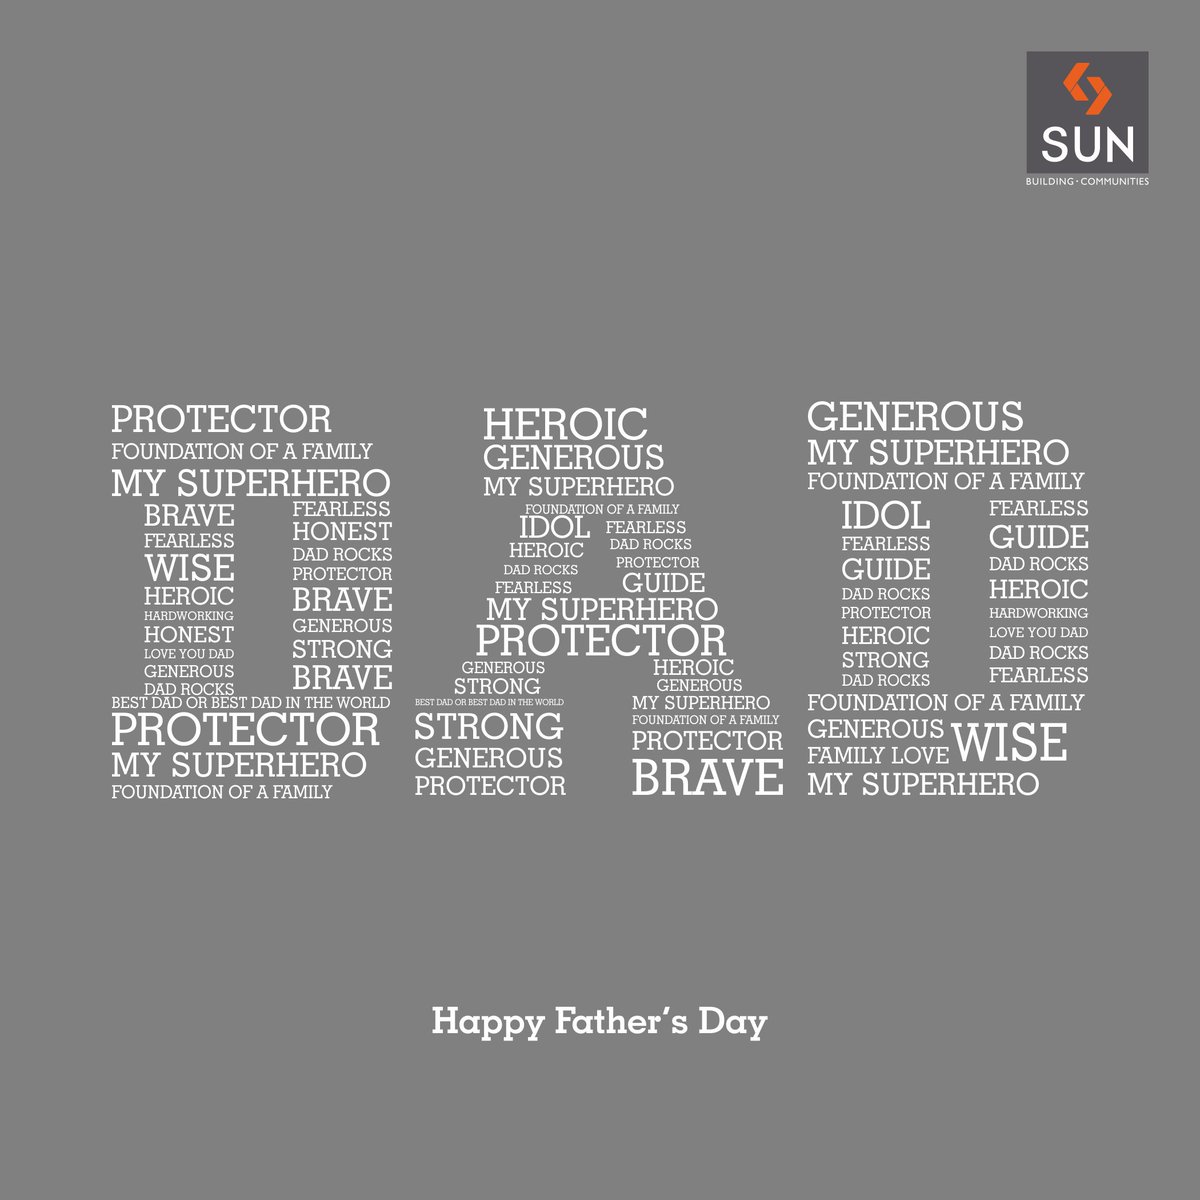 A father serves as a firm foundation of every child's life.
#HappyFathersDay to all the proud fathers! https://t.co/jLt17Ii1E2